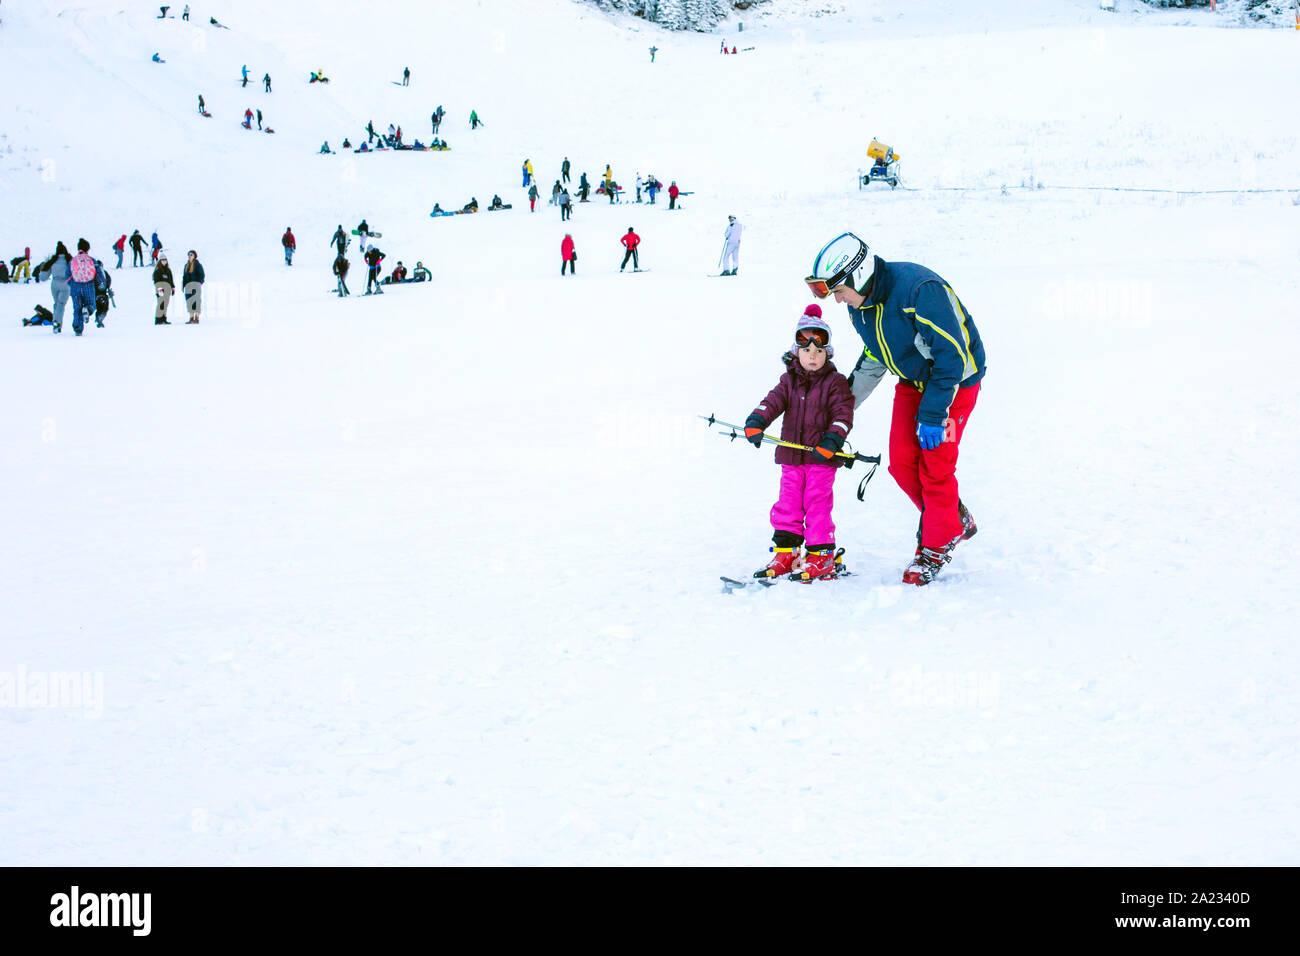 Bansko, Bulgaria - December, 12, 2015: The small child learning to ski and man on the slope in Bansko, Bulgaria Stock Photo